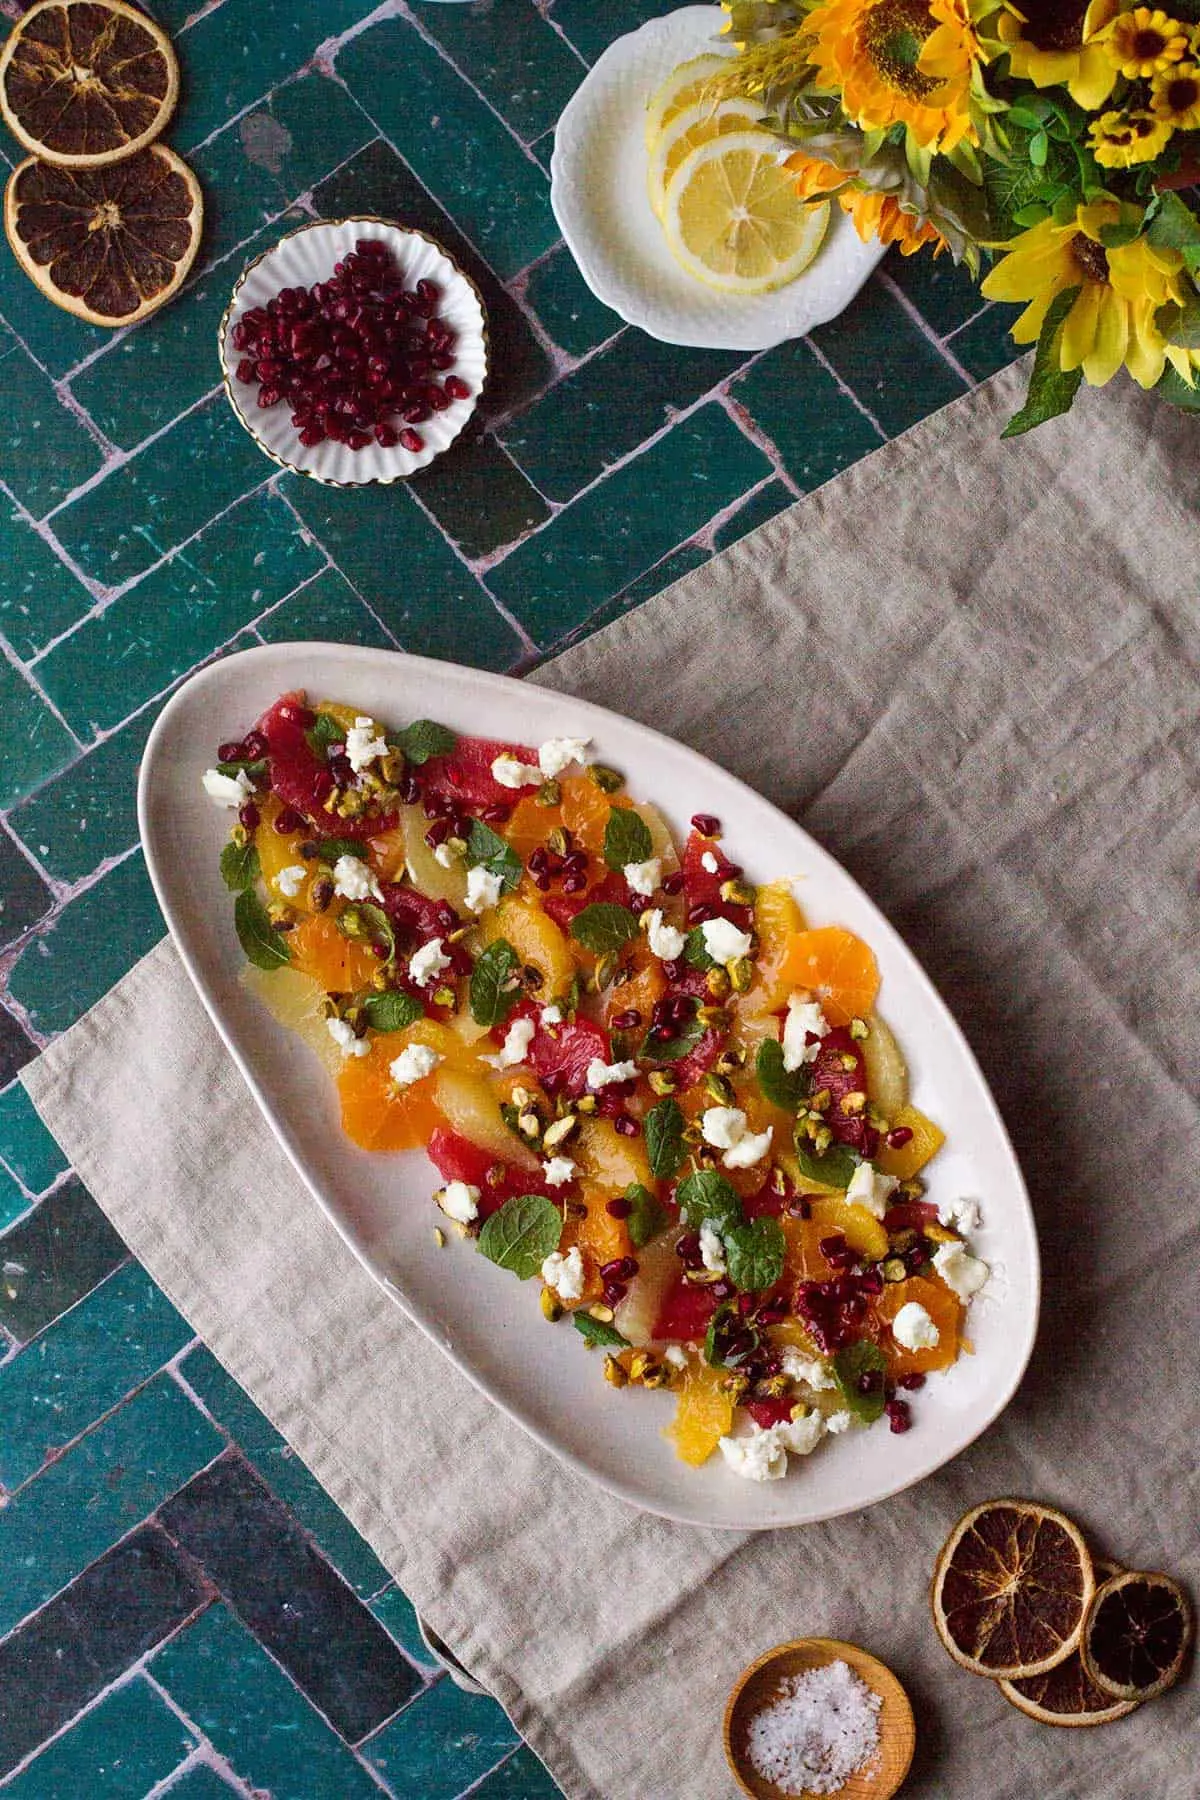 The pomegranate honey citrus salad seen from above.